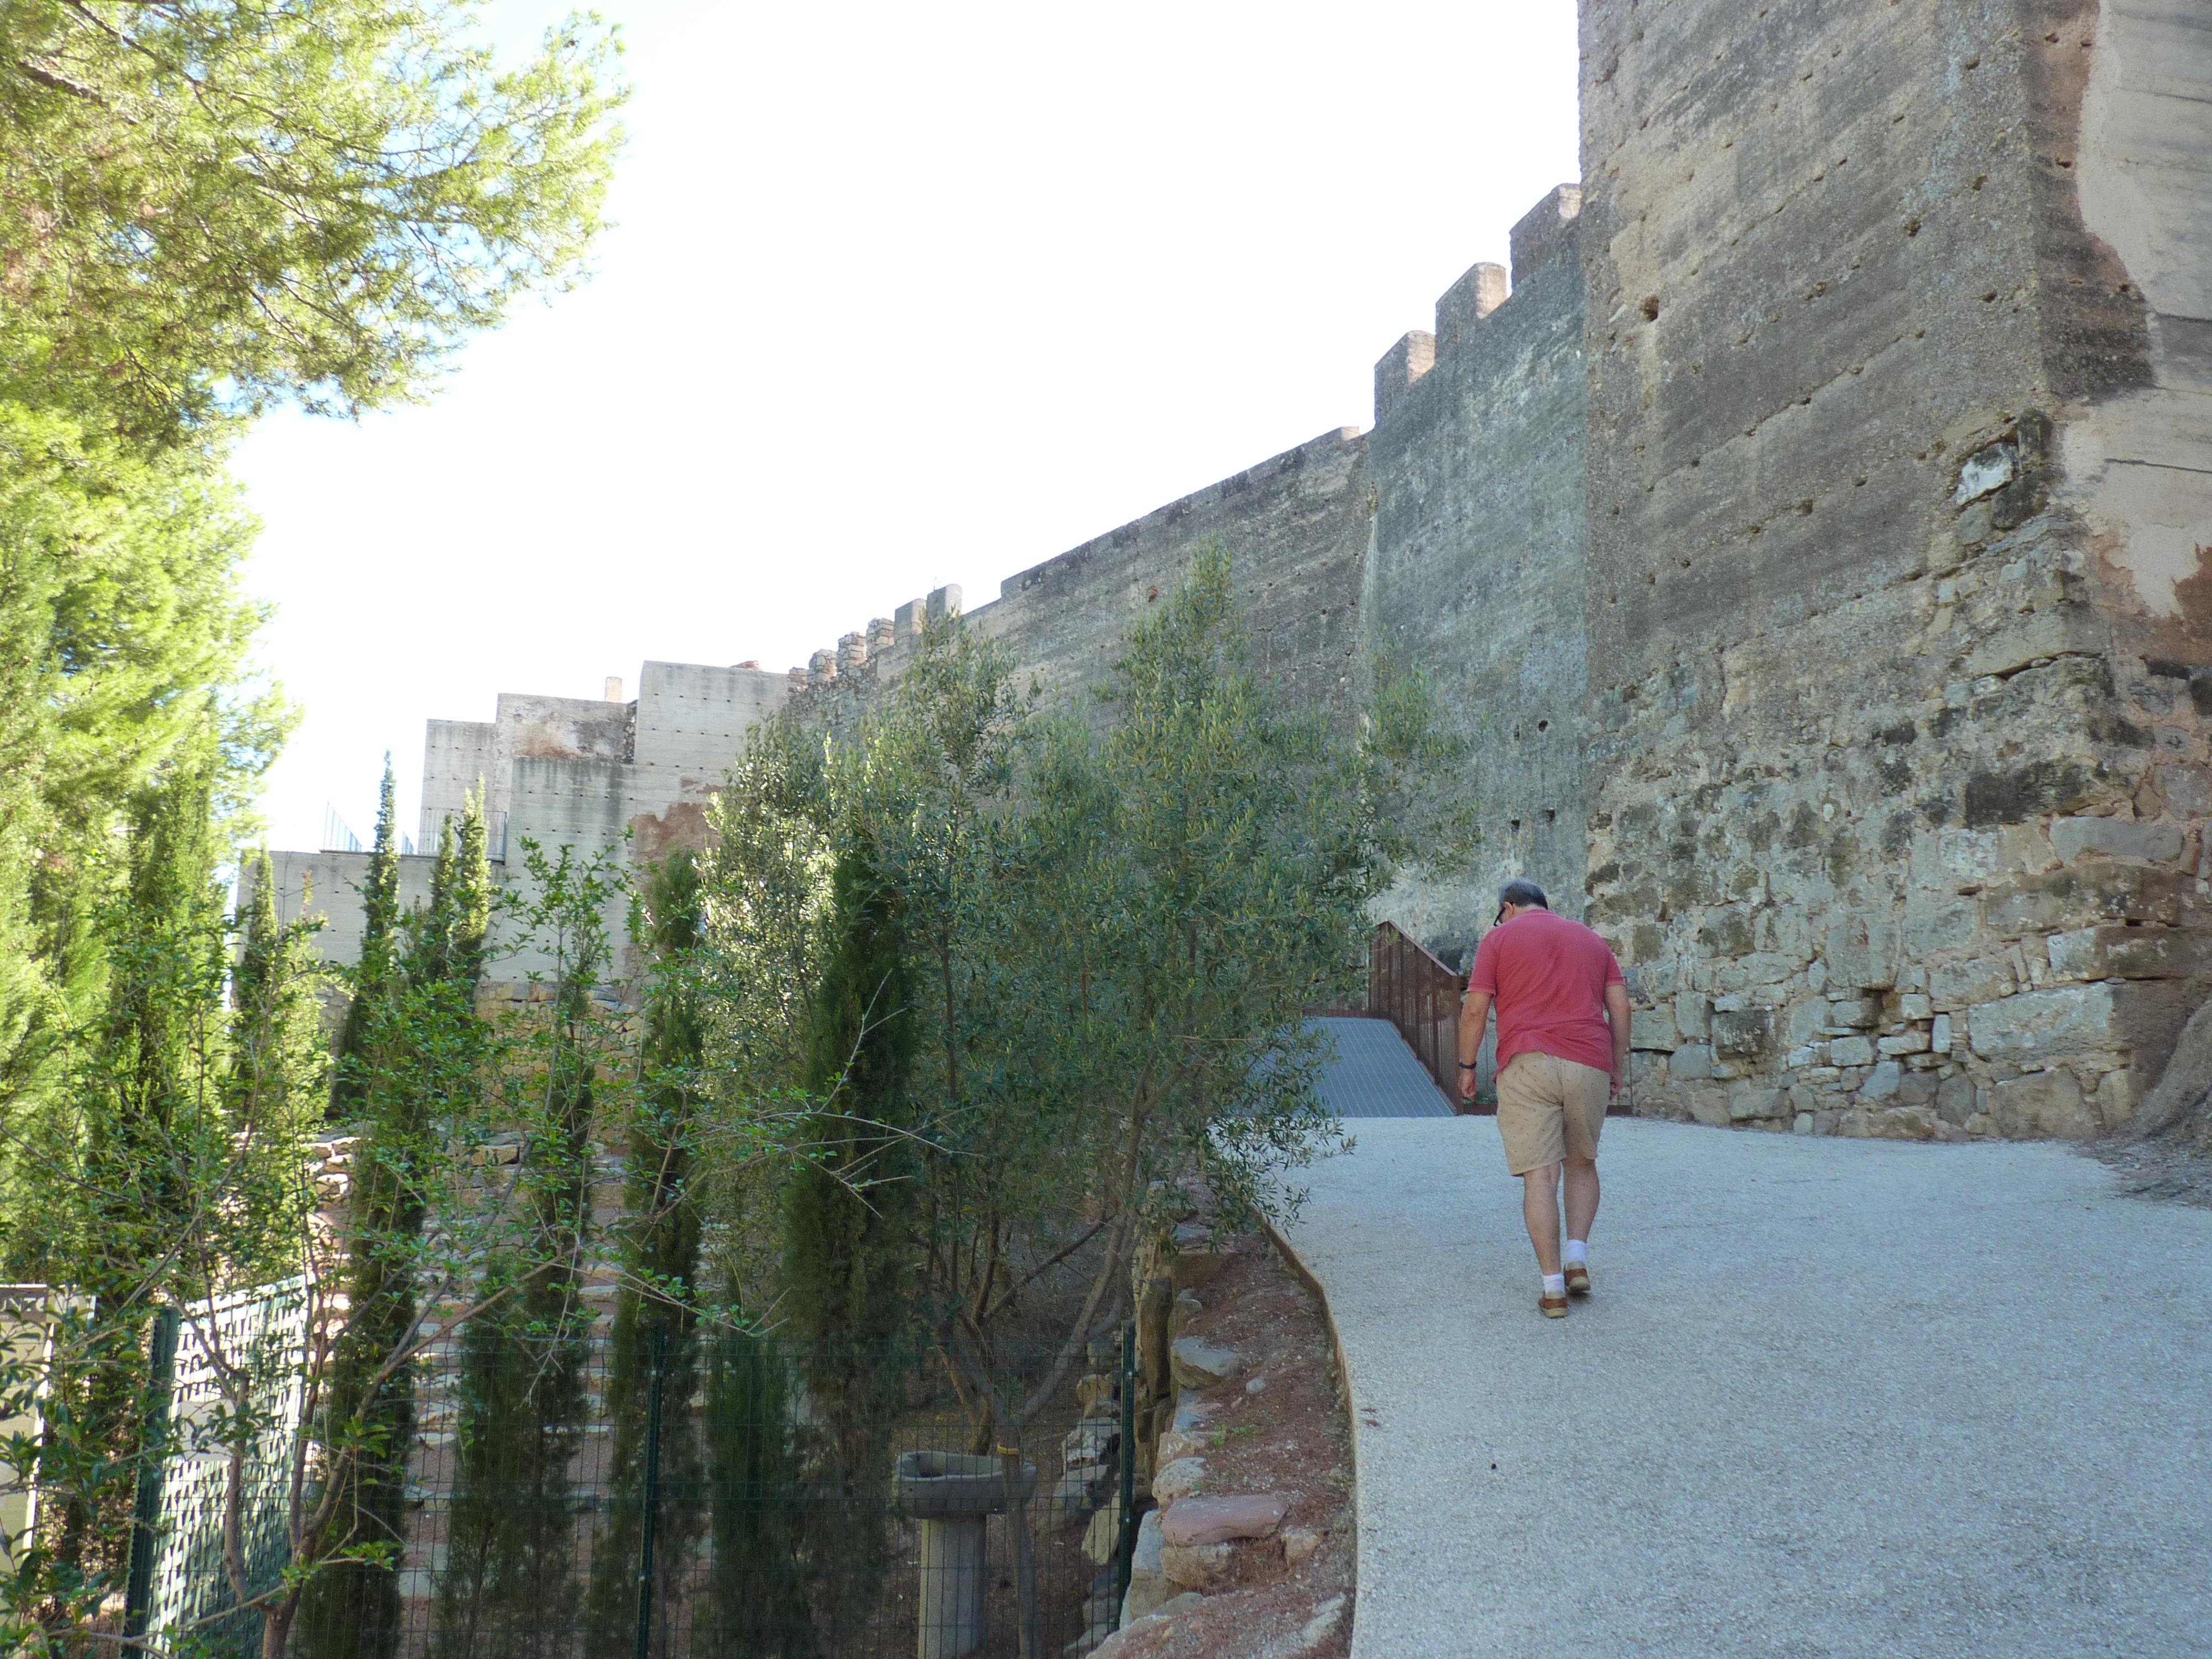 Walking the ramp to Castle gate